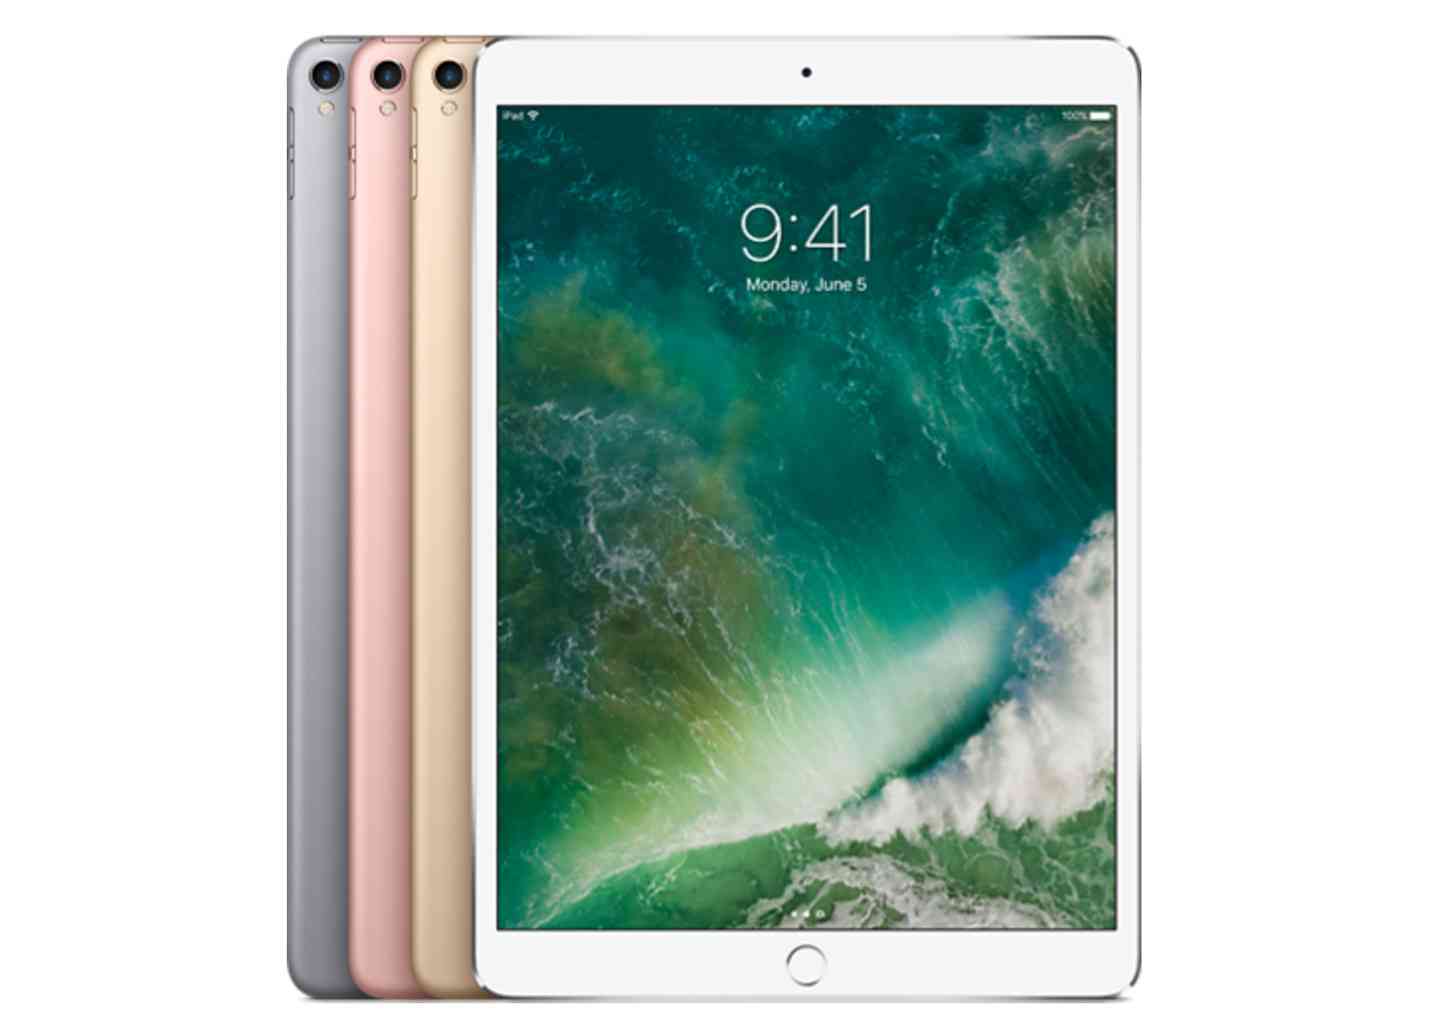 Apple 10.5-inch iPad Pro official colors